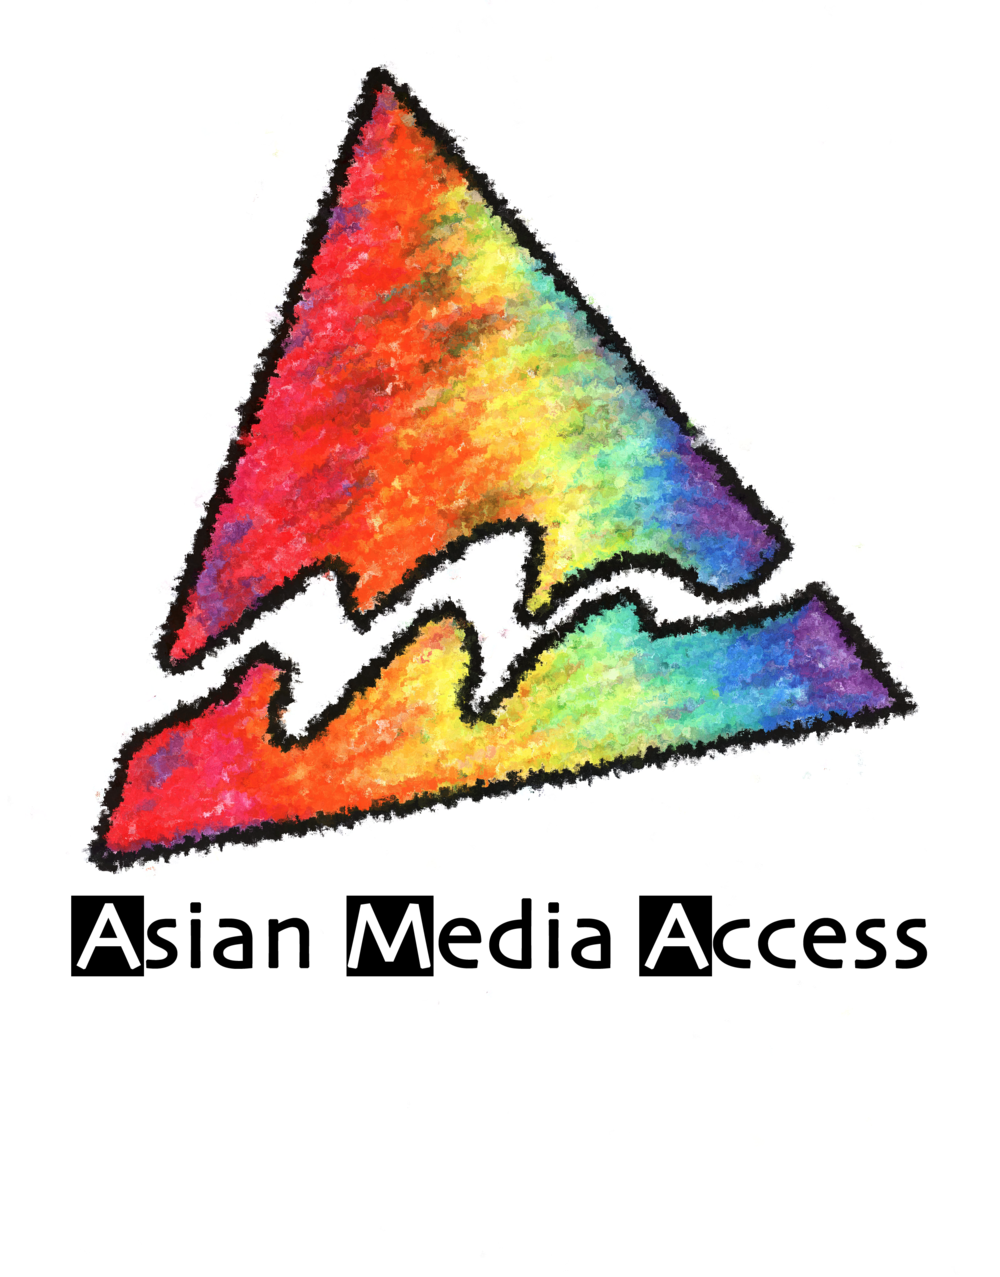 [www.asianhealth.org][790]AMA.png